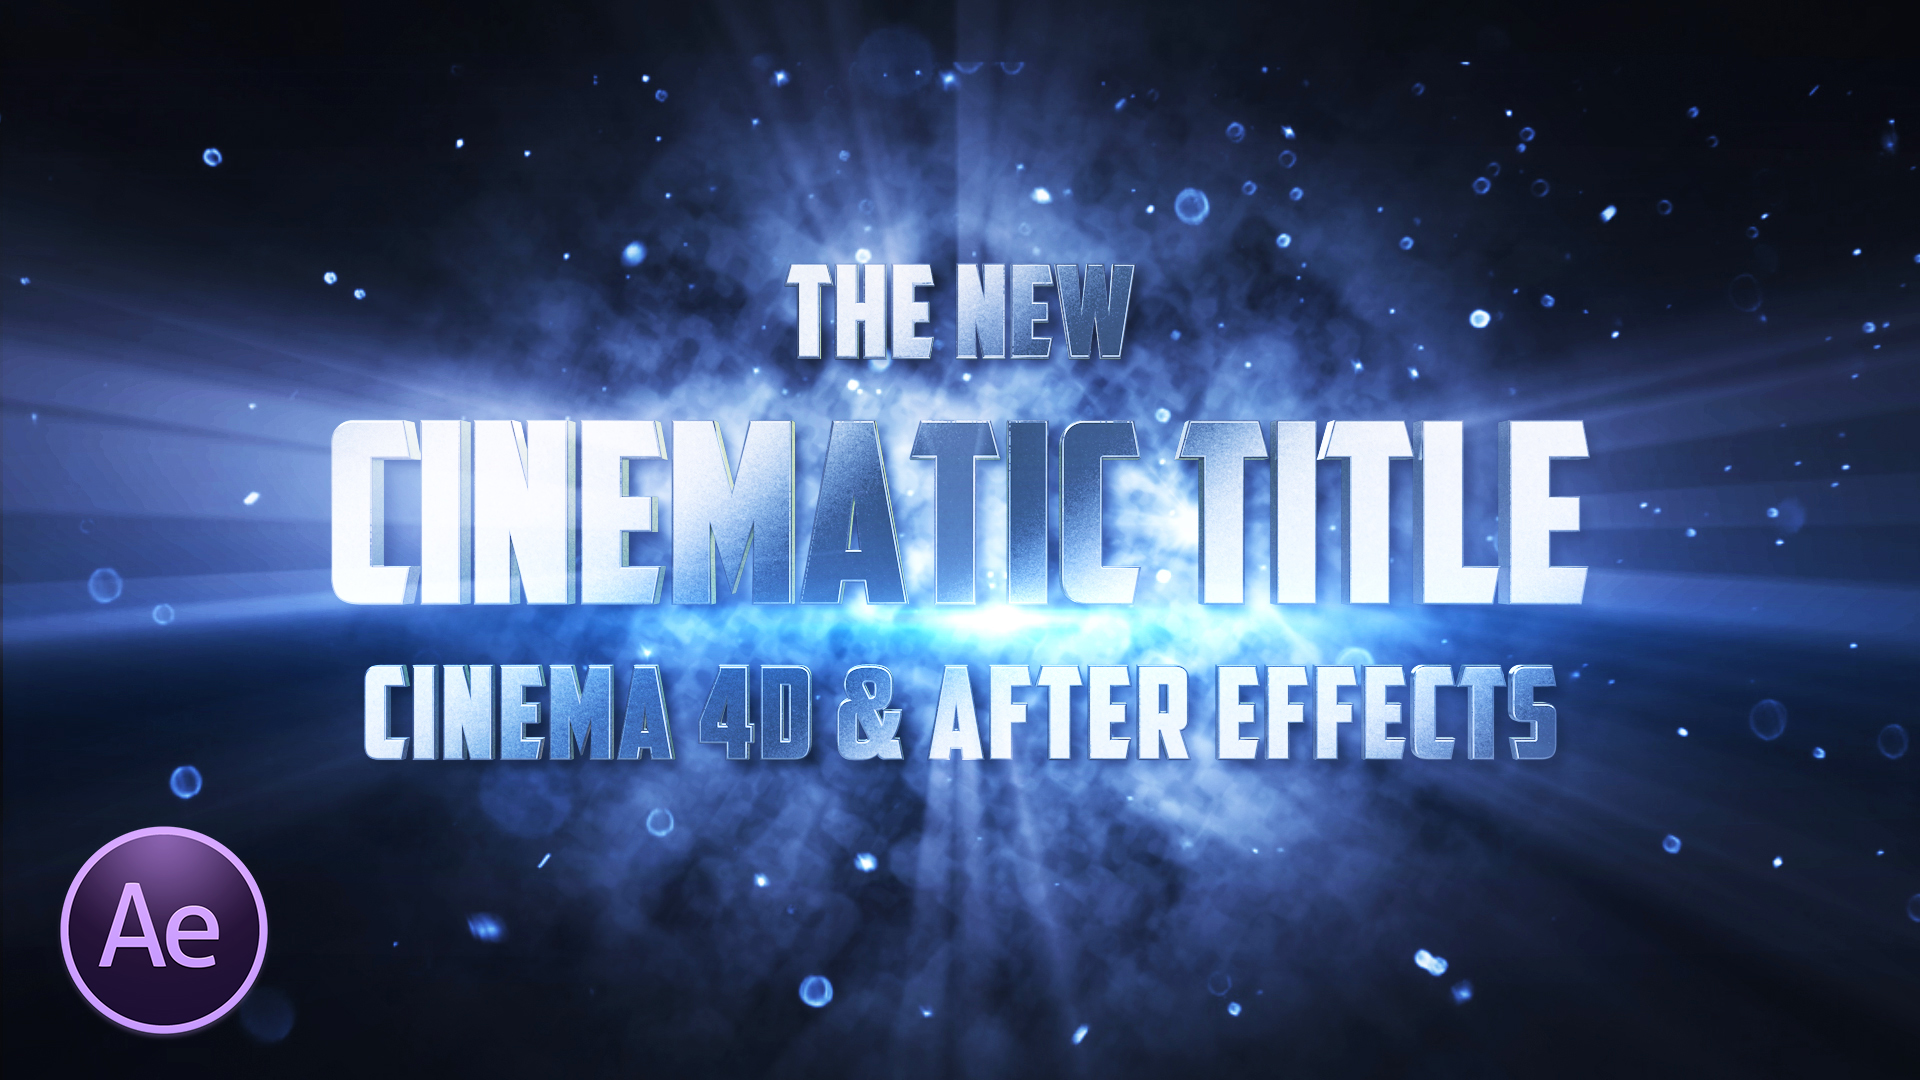 After Effects Templates Free Download Cinematic Title Animation In After Effects Fattu Tutorials